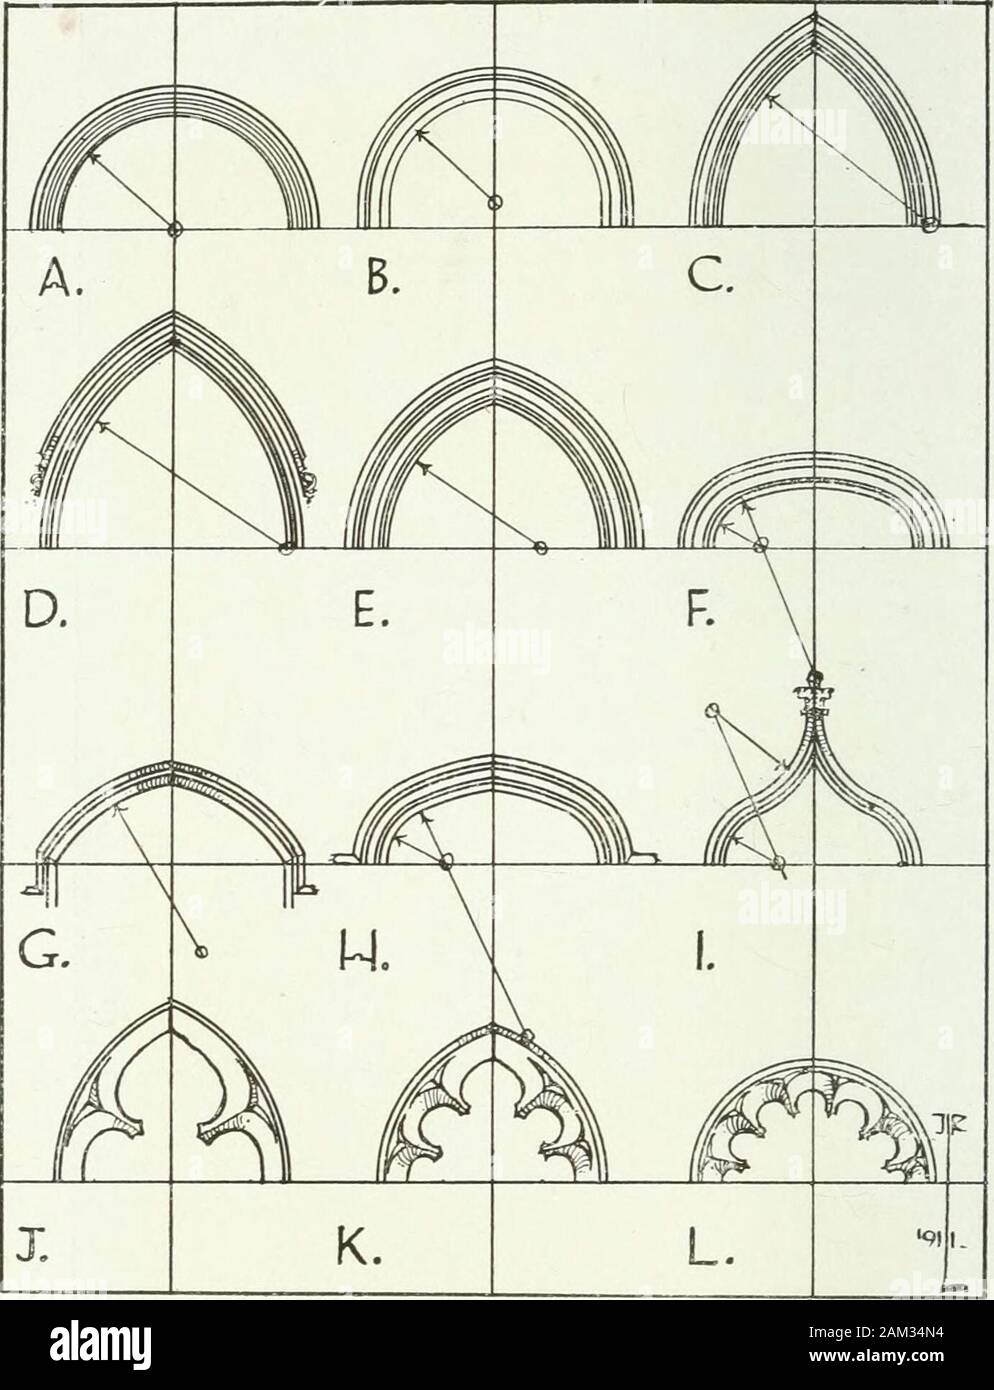 Www Flickr Com Photos Internetarchivebookimages s Book Varieties Of The Arch A Semicircular B Stilted C Lancet I Equilateral E Drop Arch F Three Eentred G Segmental Pointed H Pour Centred I Ogee J Trefoil K Cinquefoil L